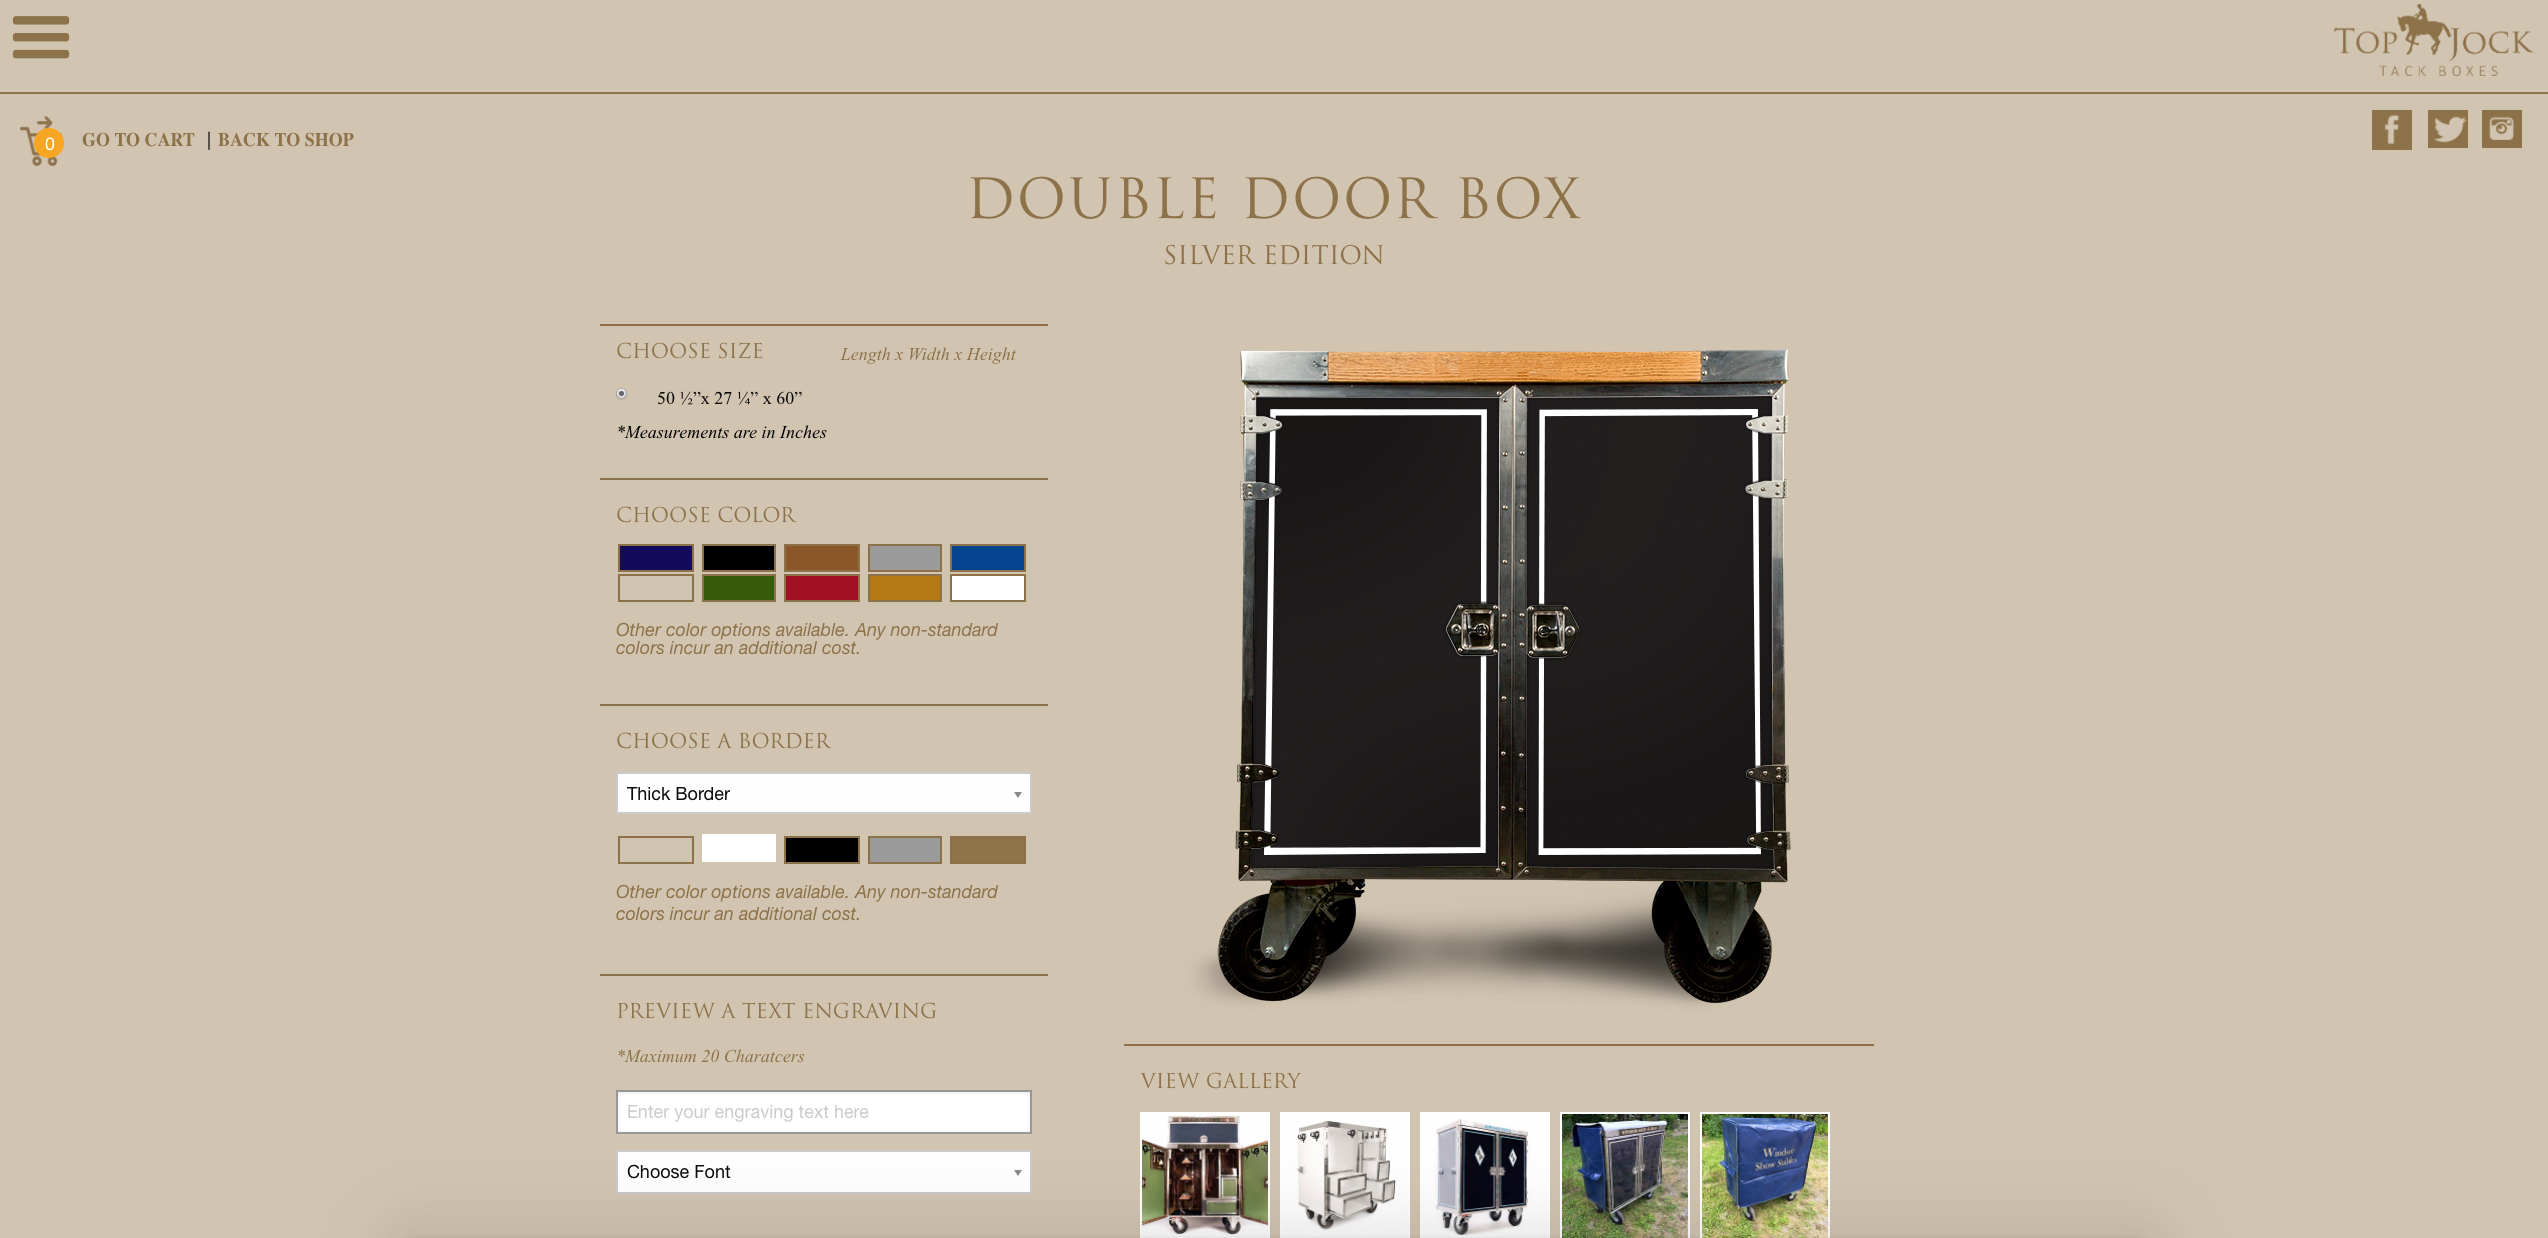 Top Jock Tack Boxes Launches Online Interactive Product Shop